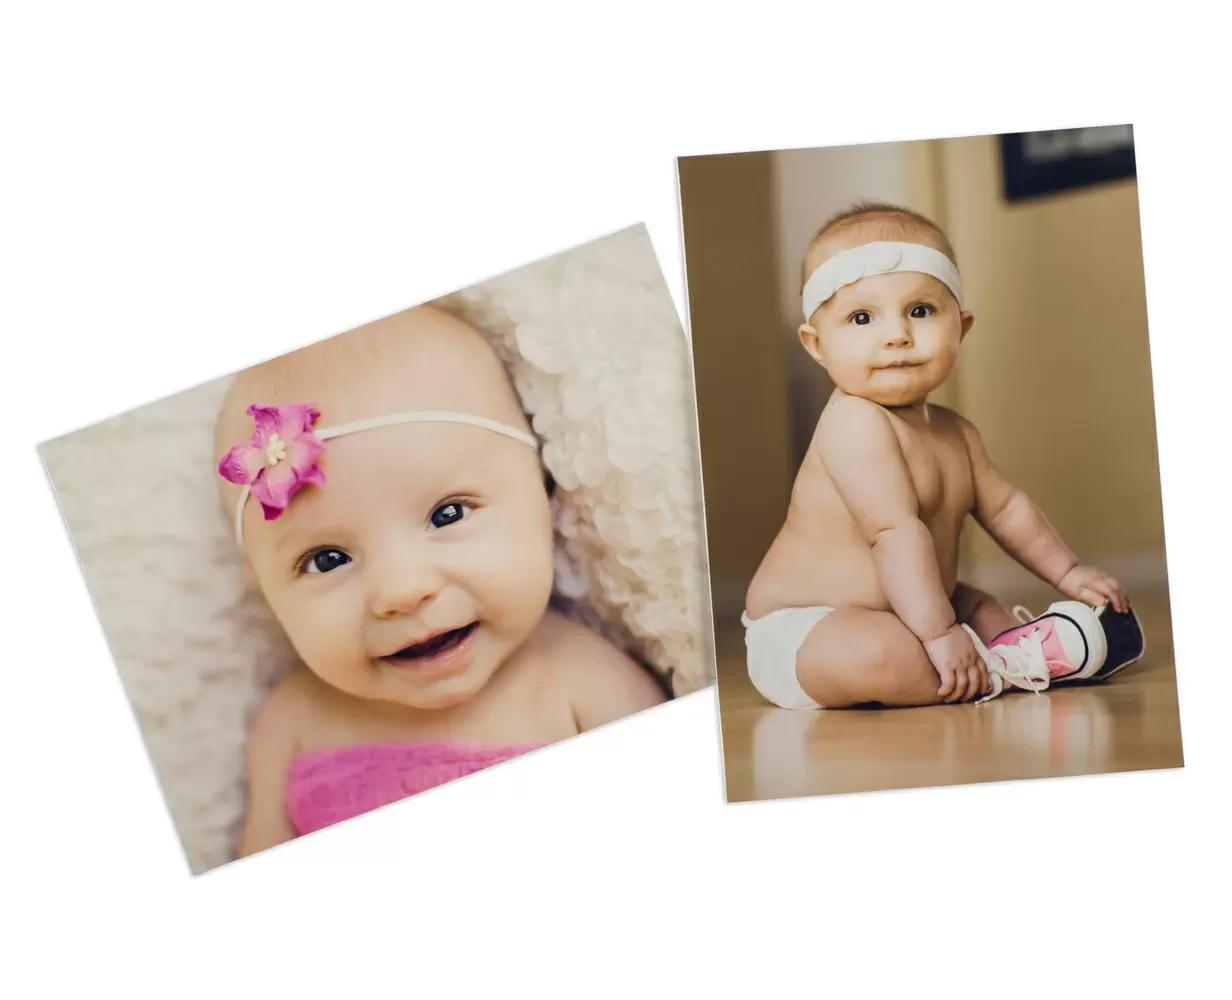 8x10 Photo Print for $0.99